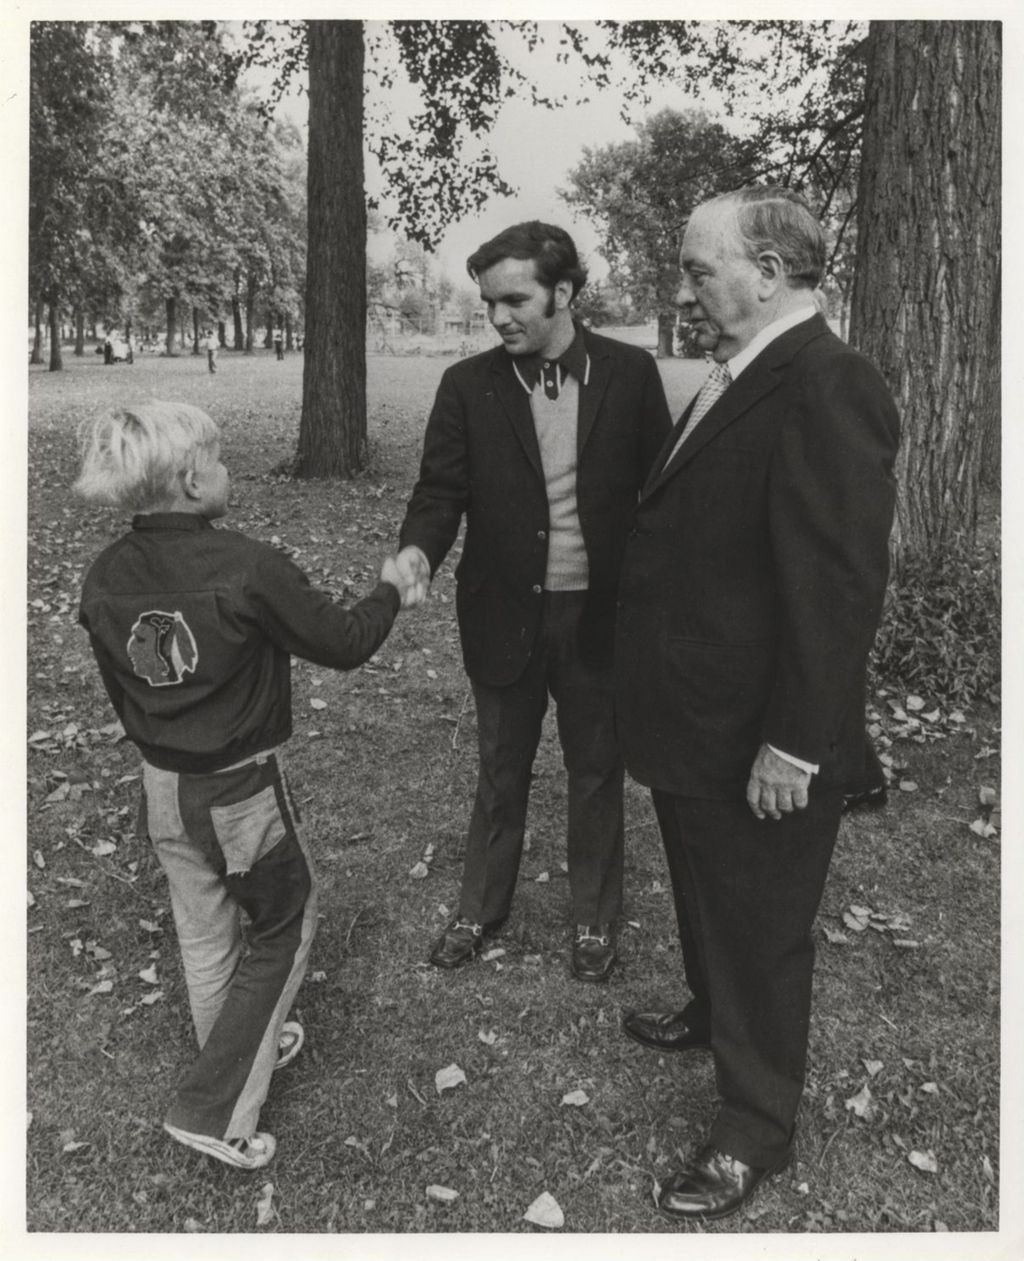 Miniature of Richard M. Daley greets a young boy as Richard J. Daley looks on